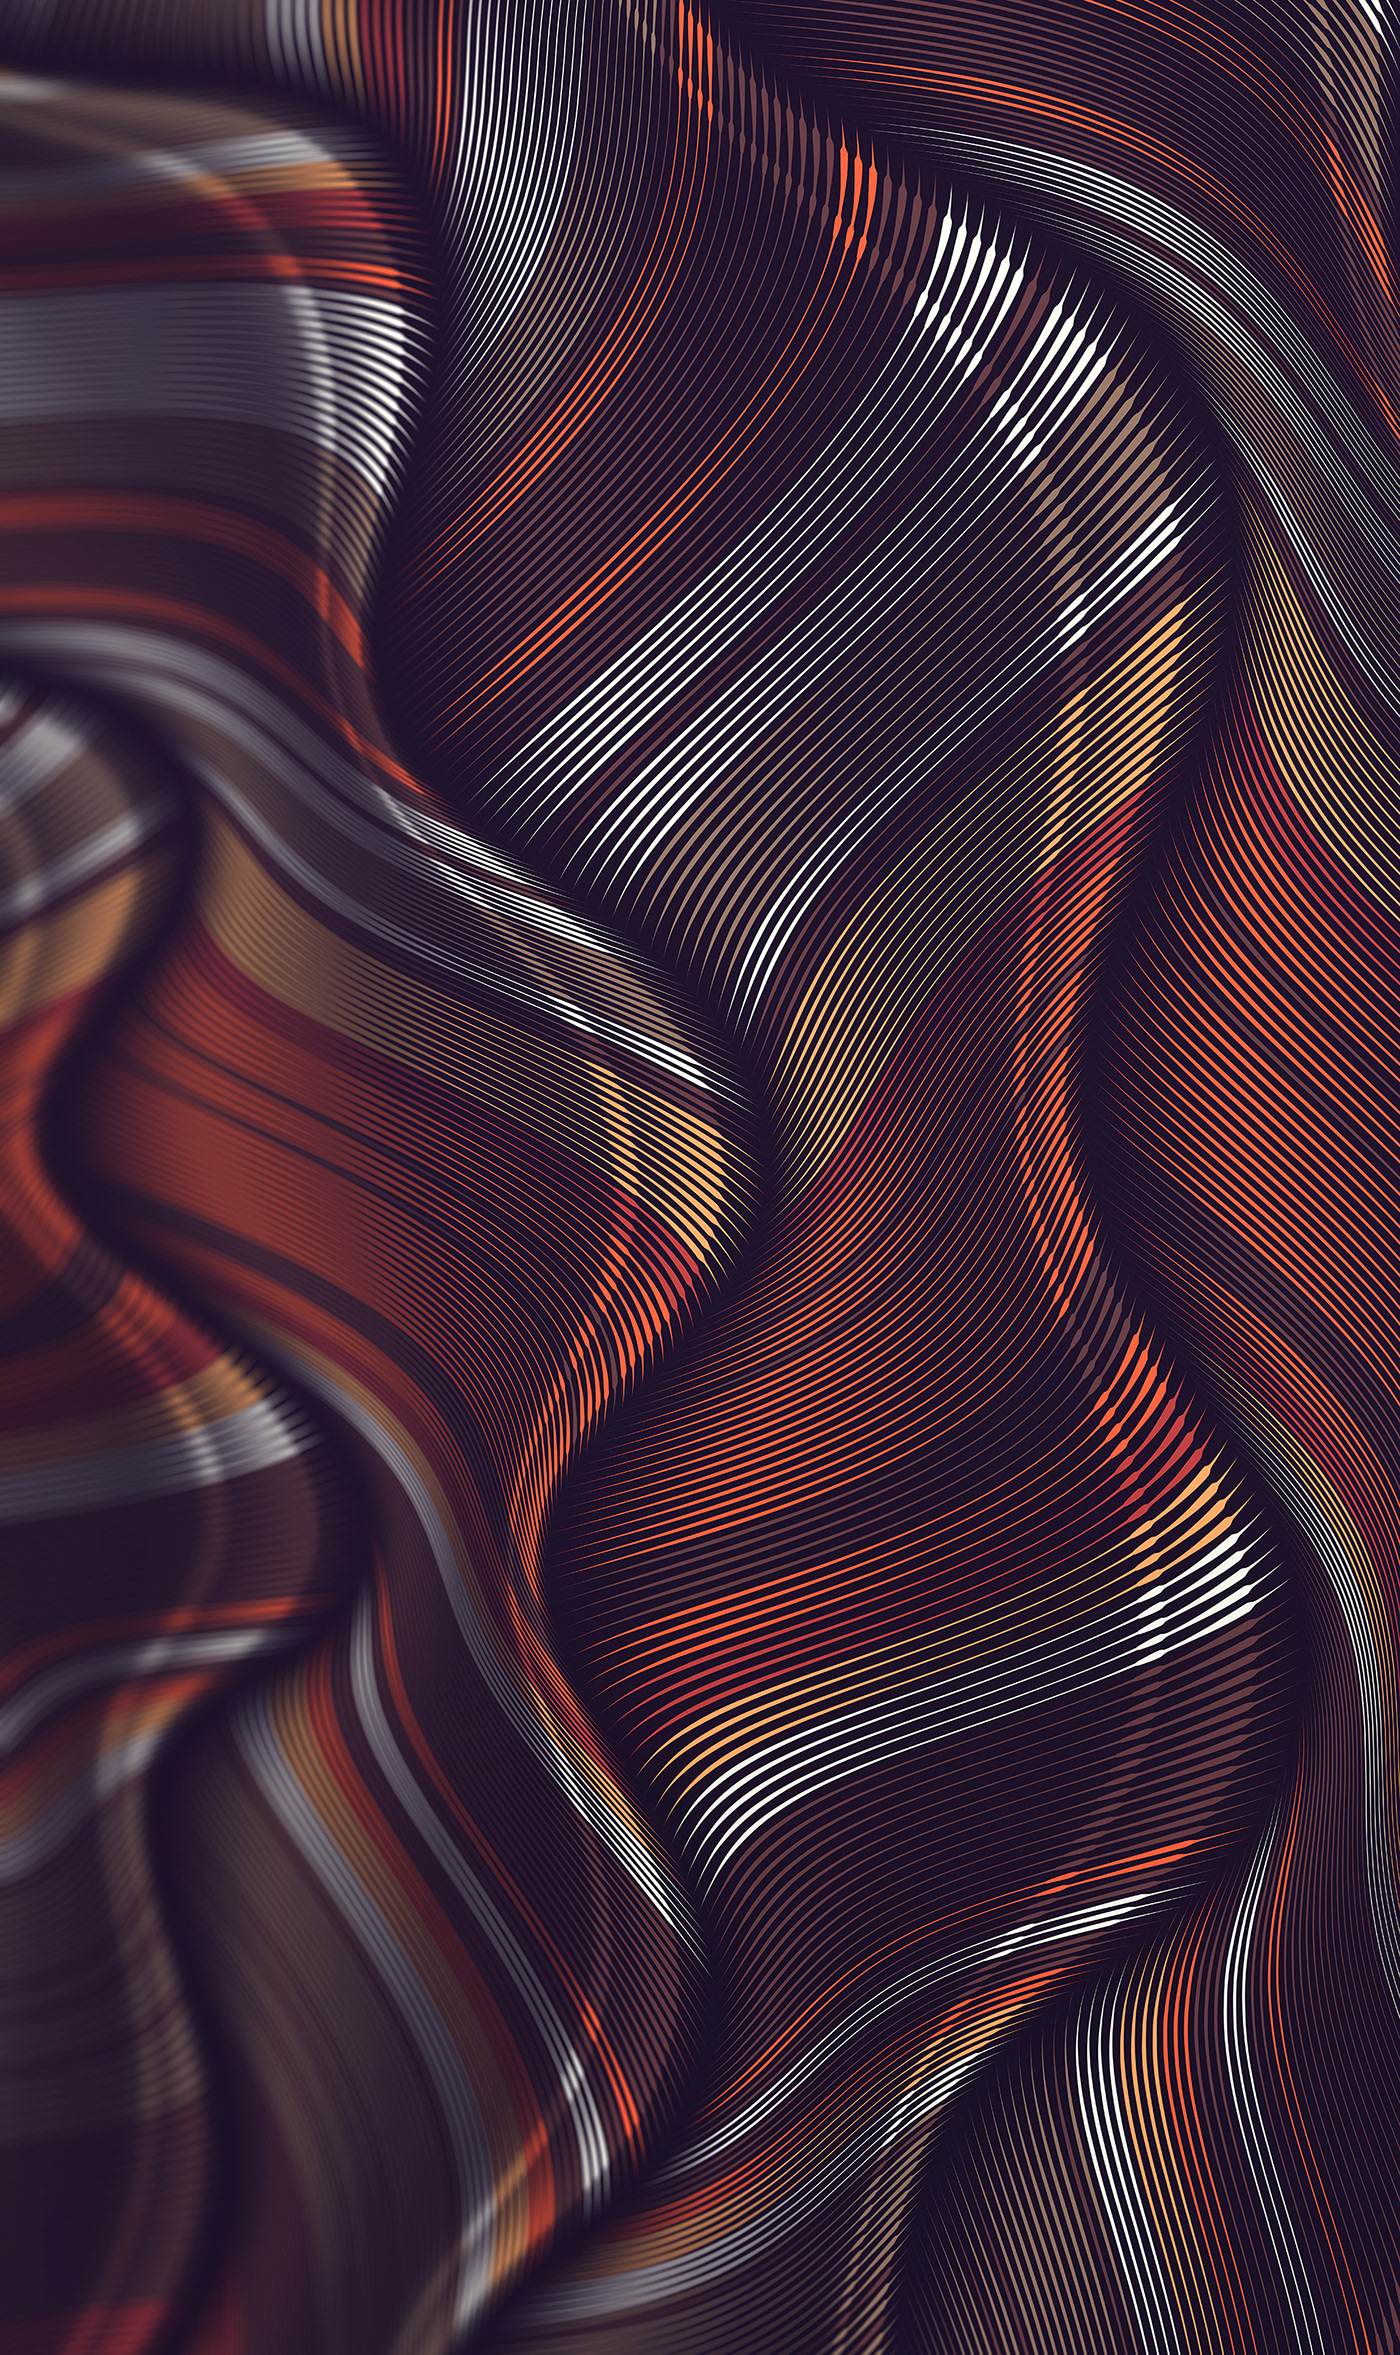 lines bands moire wave Patterns adobe